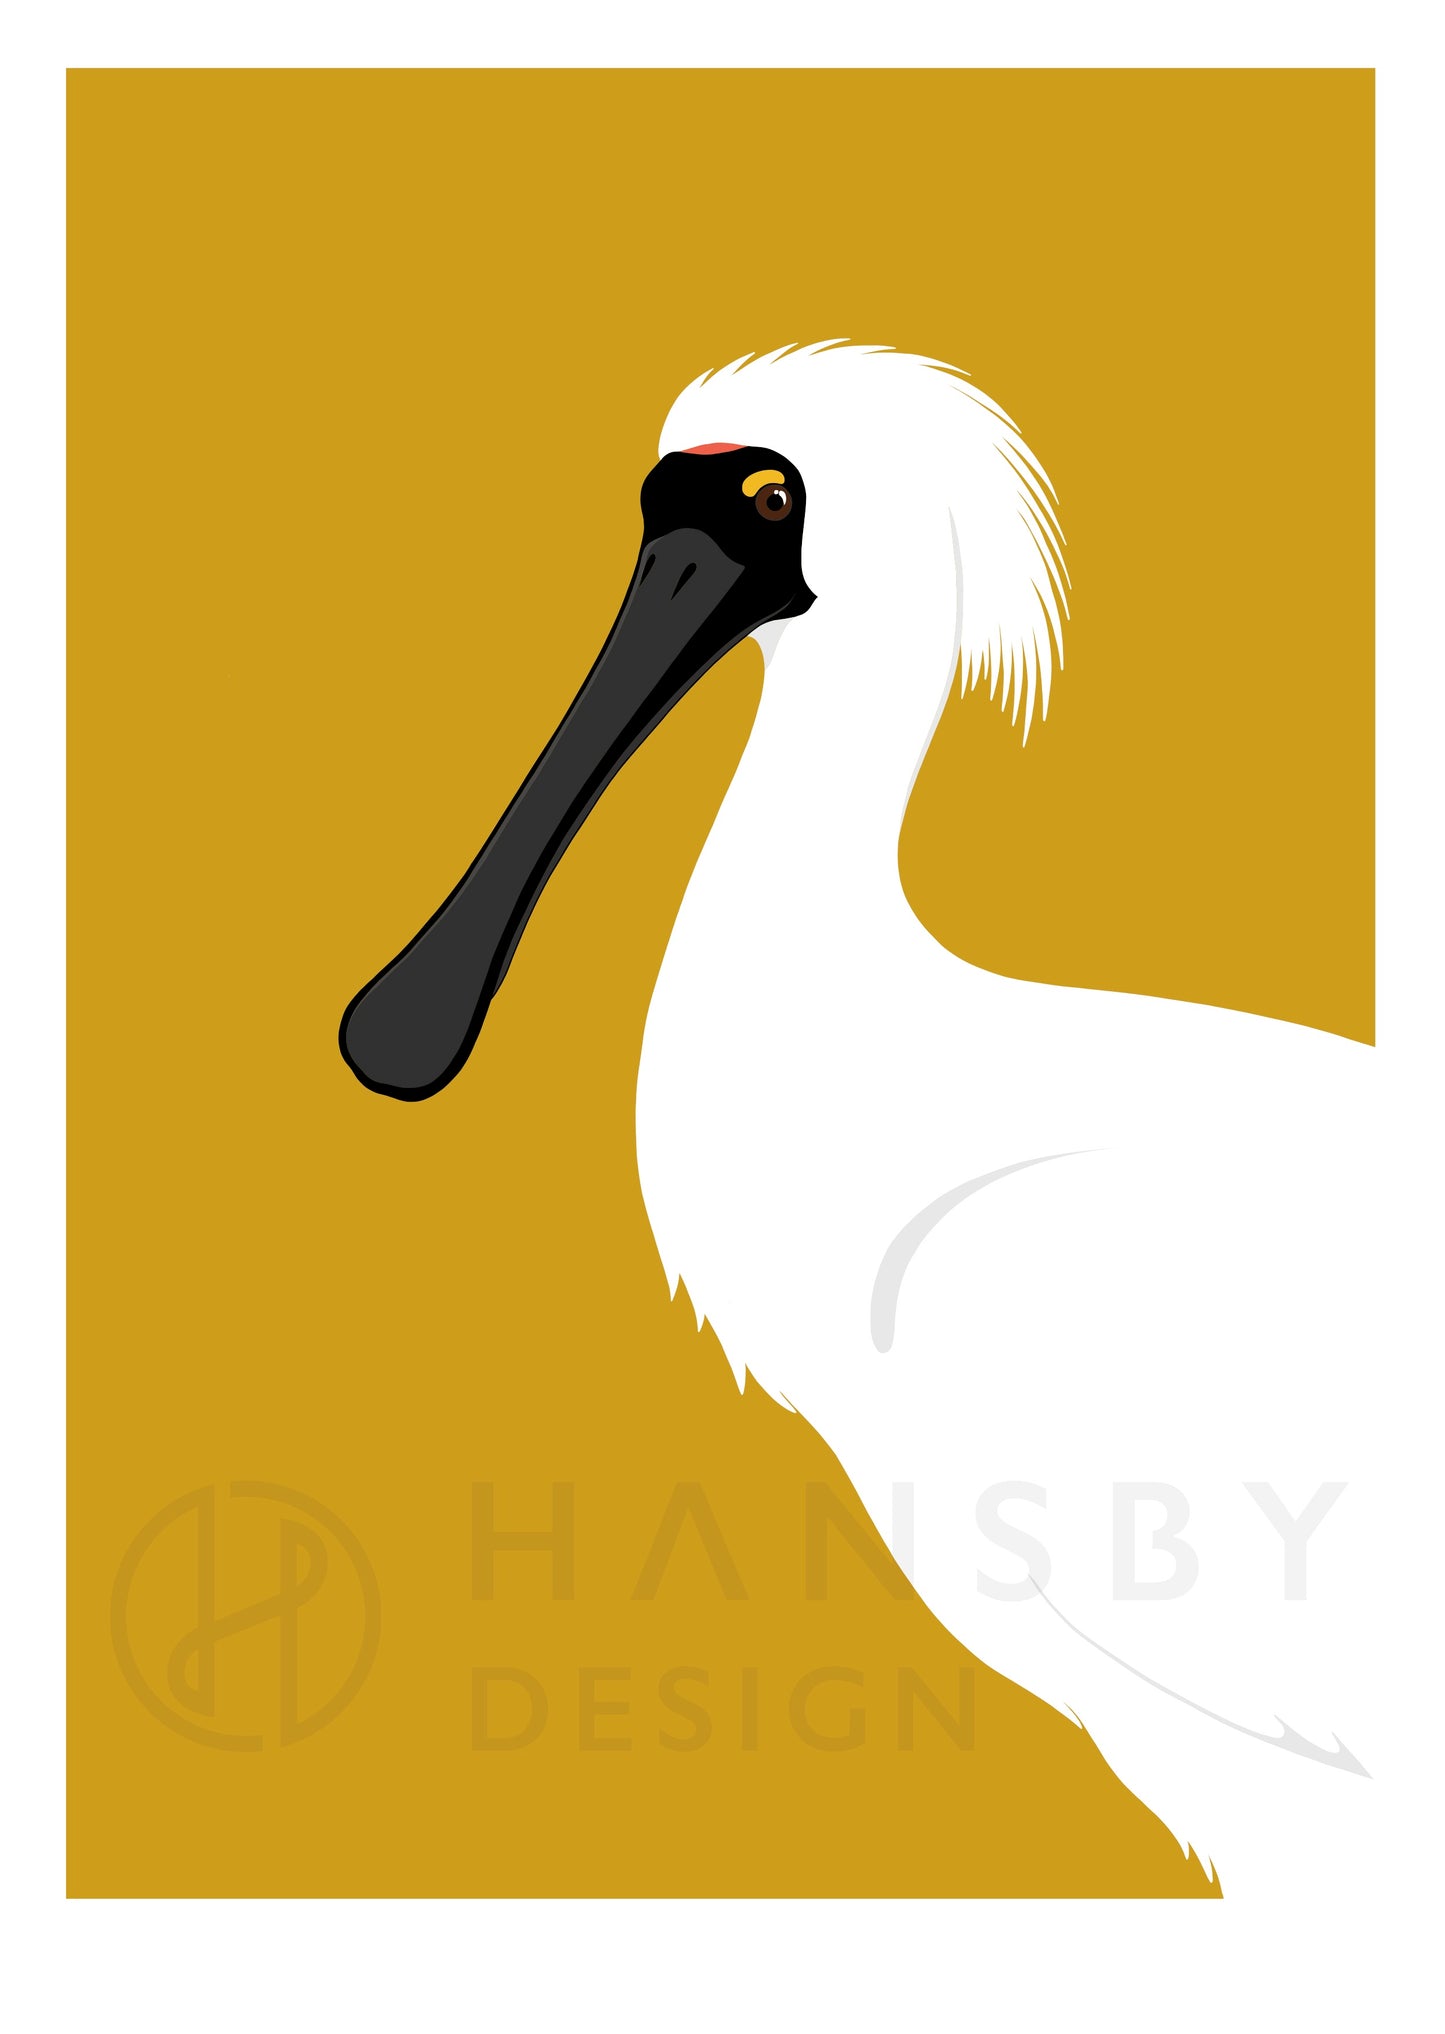 Mustard art print of the Spoonbill bird of New Zealand and Australia, by Hansby Design 